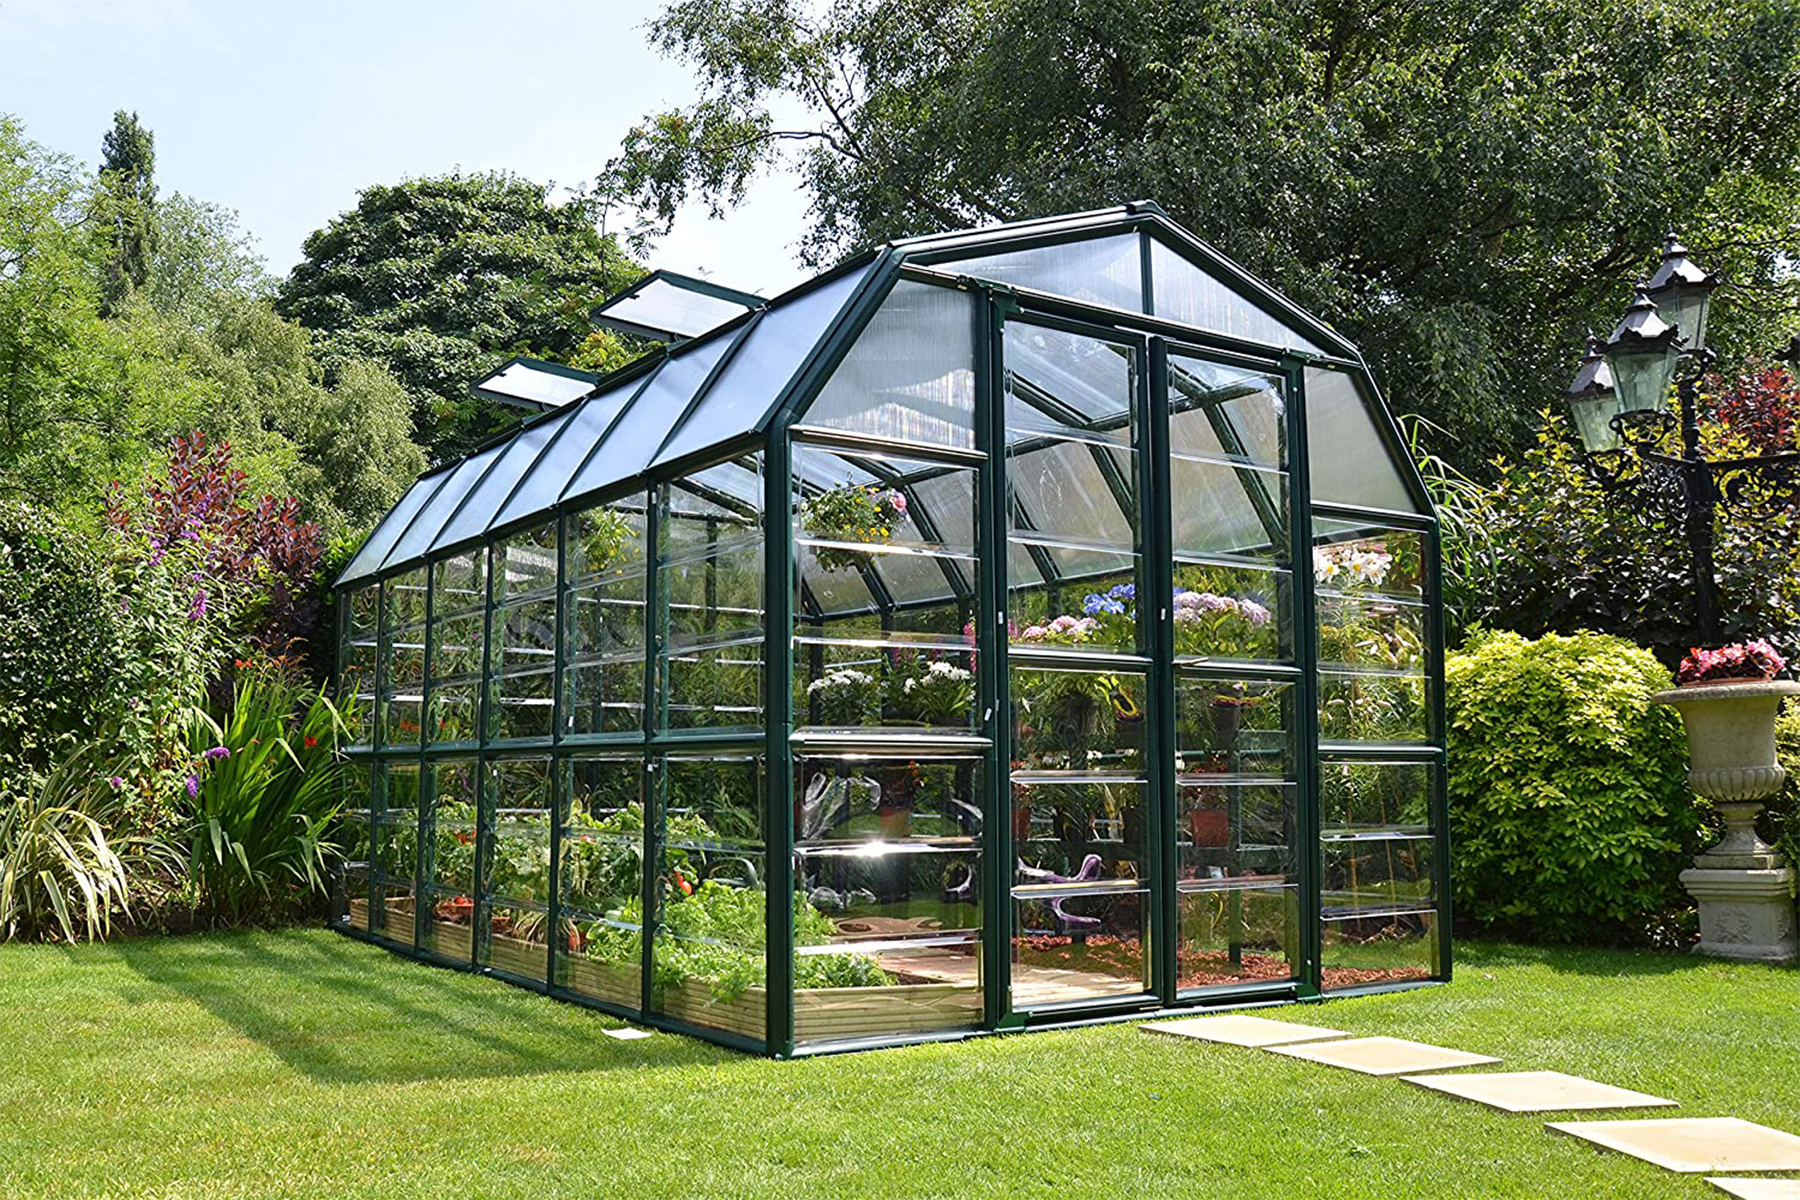 This is the cover photo for our Best Greenhouse Kits article. It features a greenhouse with plants inside, situated in a garden with green grass, trees, bushes, and flowers.